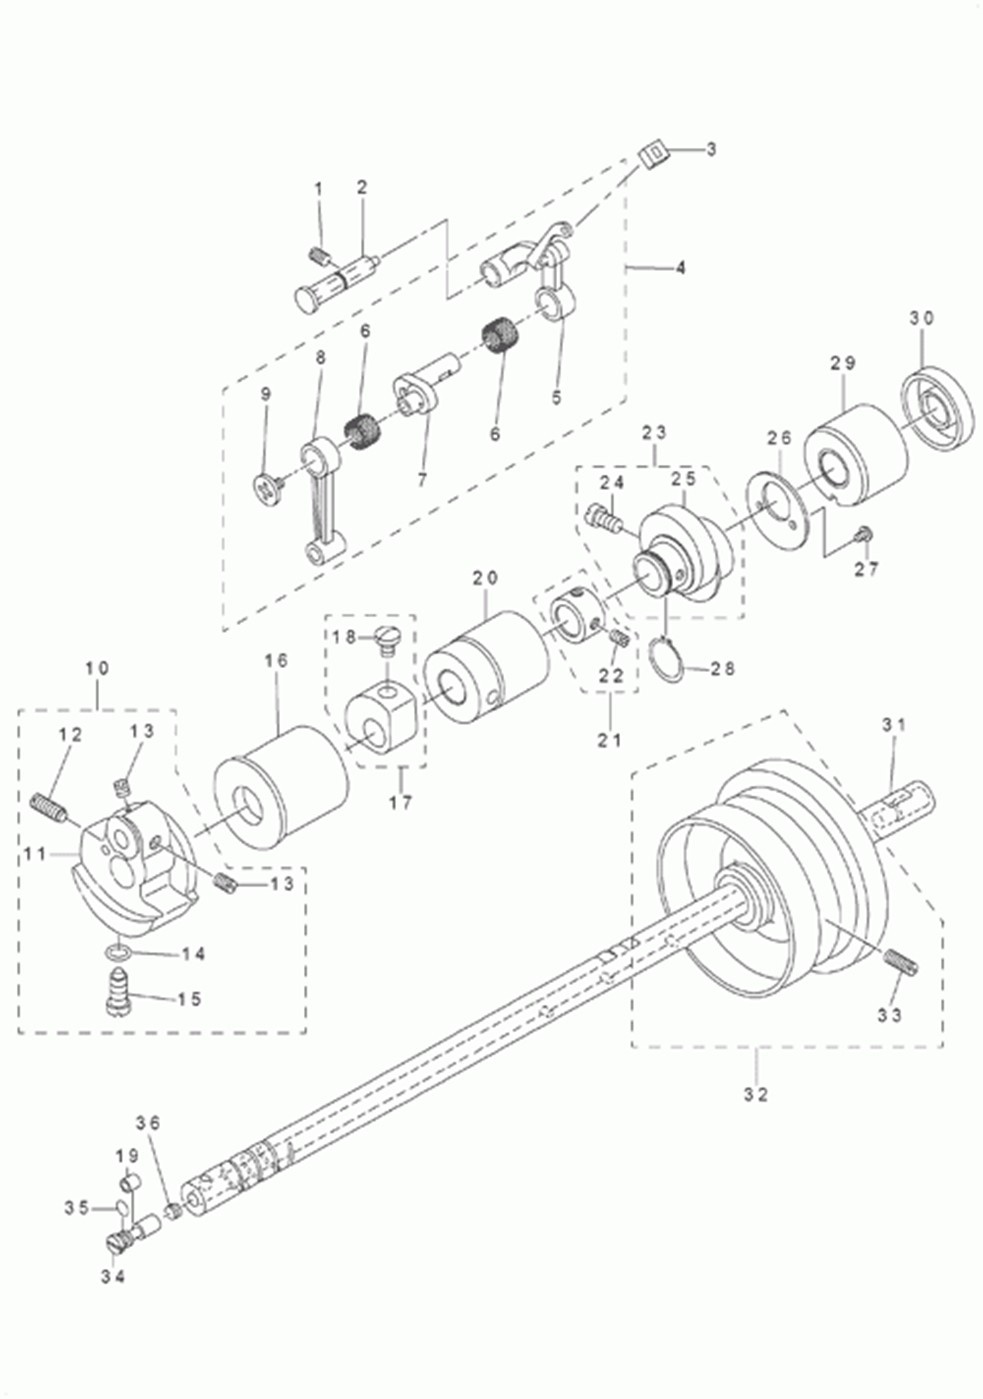 DLM-5200N - 2. MAIN SHAFT & THREAD TAKE-UP LEVER COMPONENTS